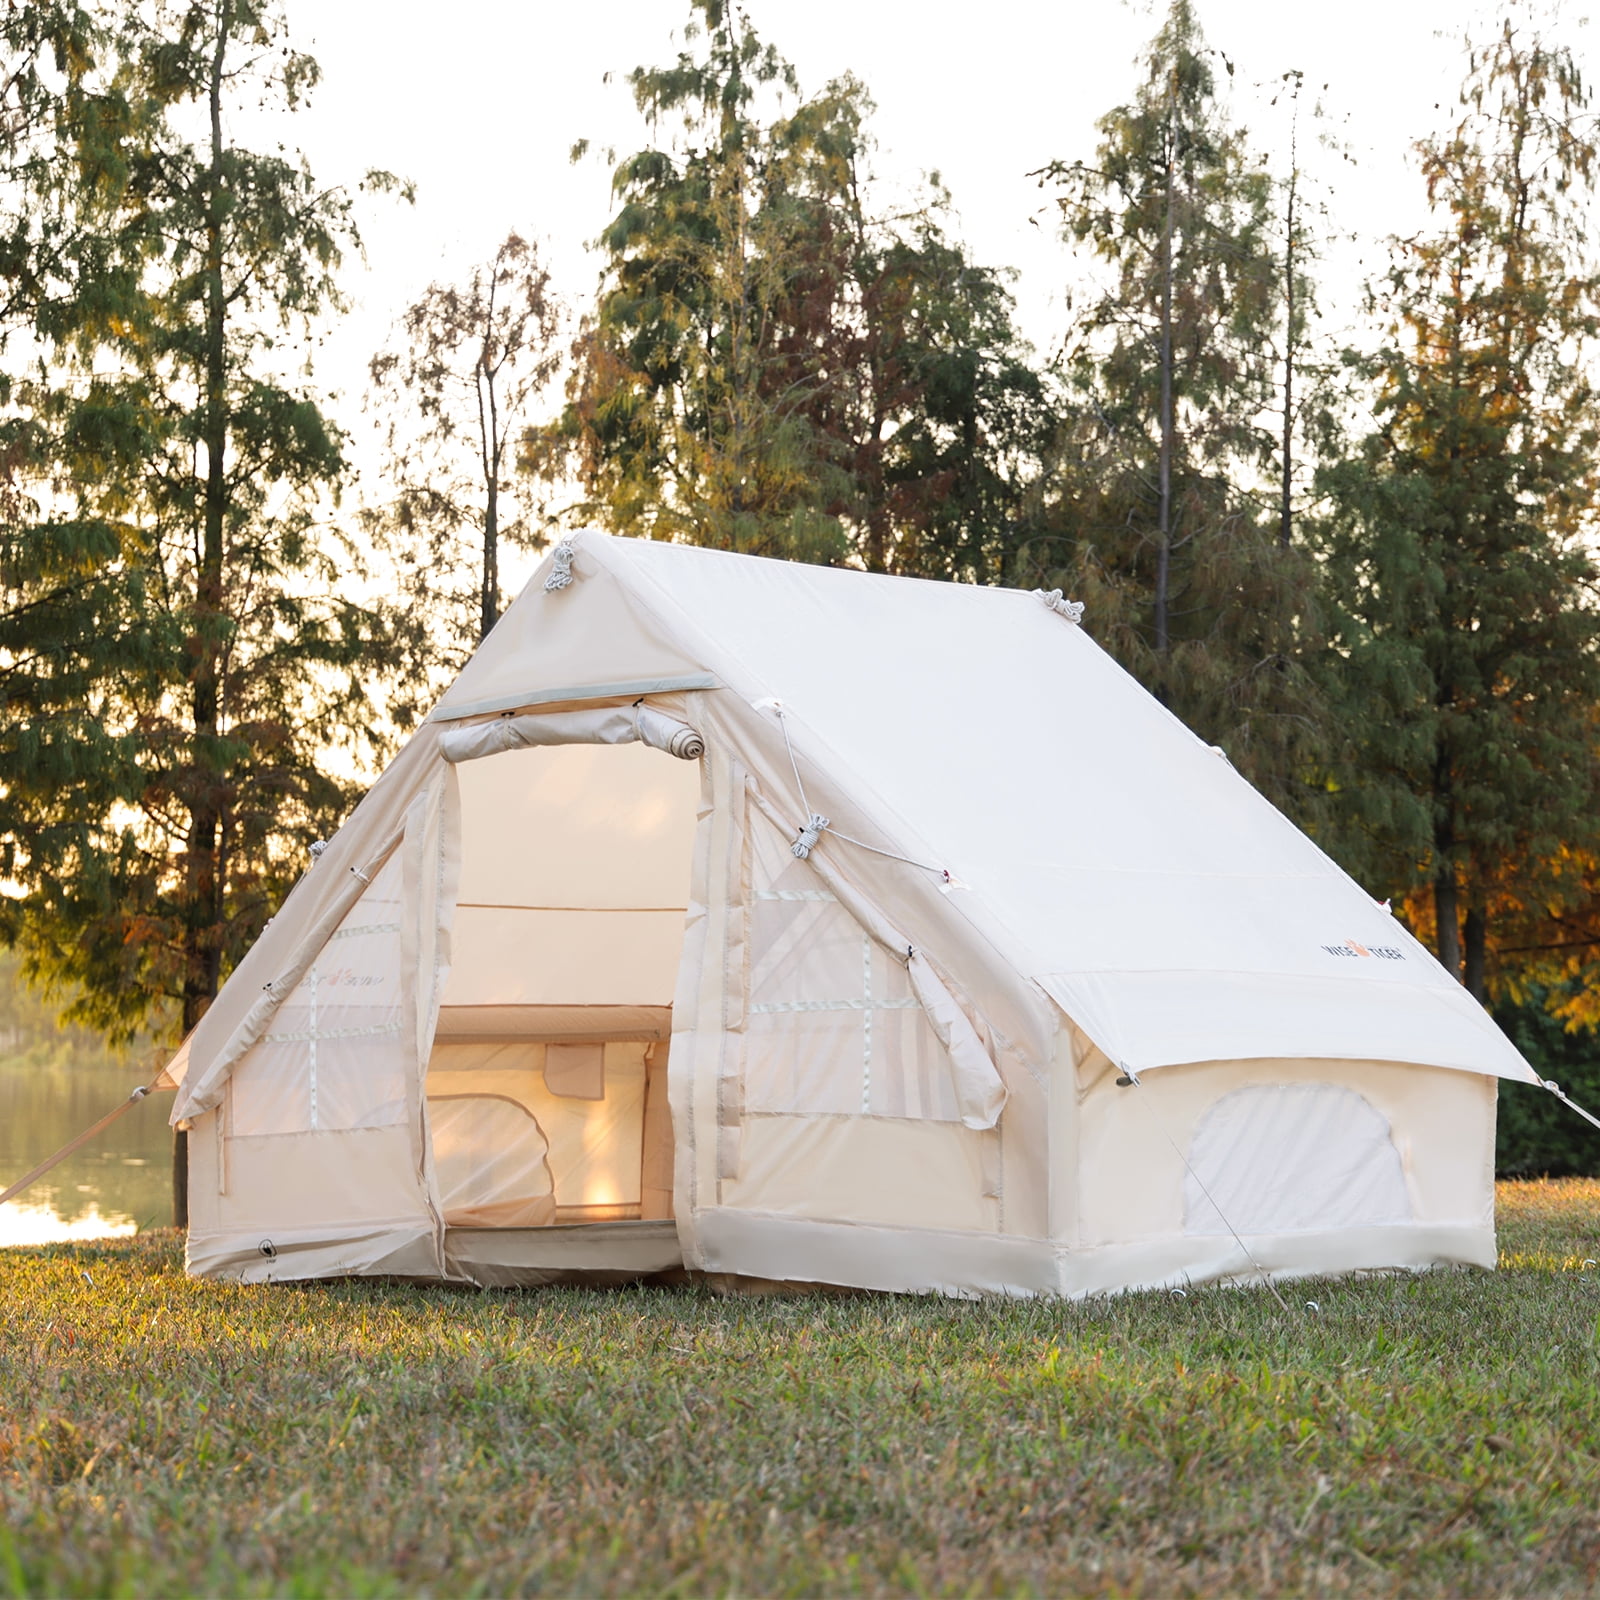 best blow up tent for camping The innovation of blow-up tents has been  around for various years already, but it is becoming extremely famous  recently. The vast improvements in the design in